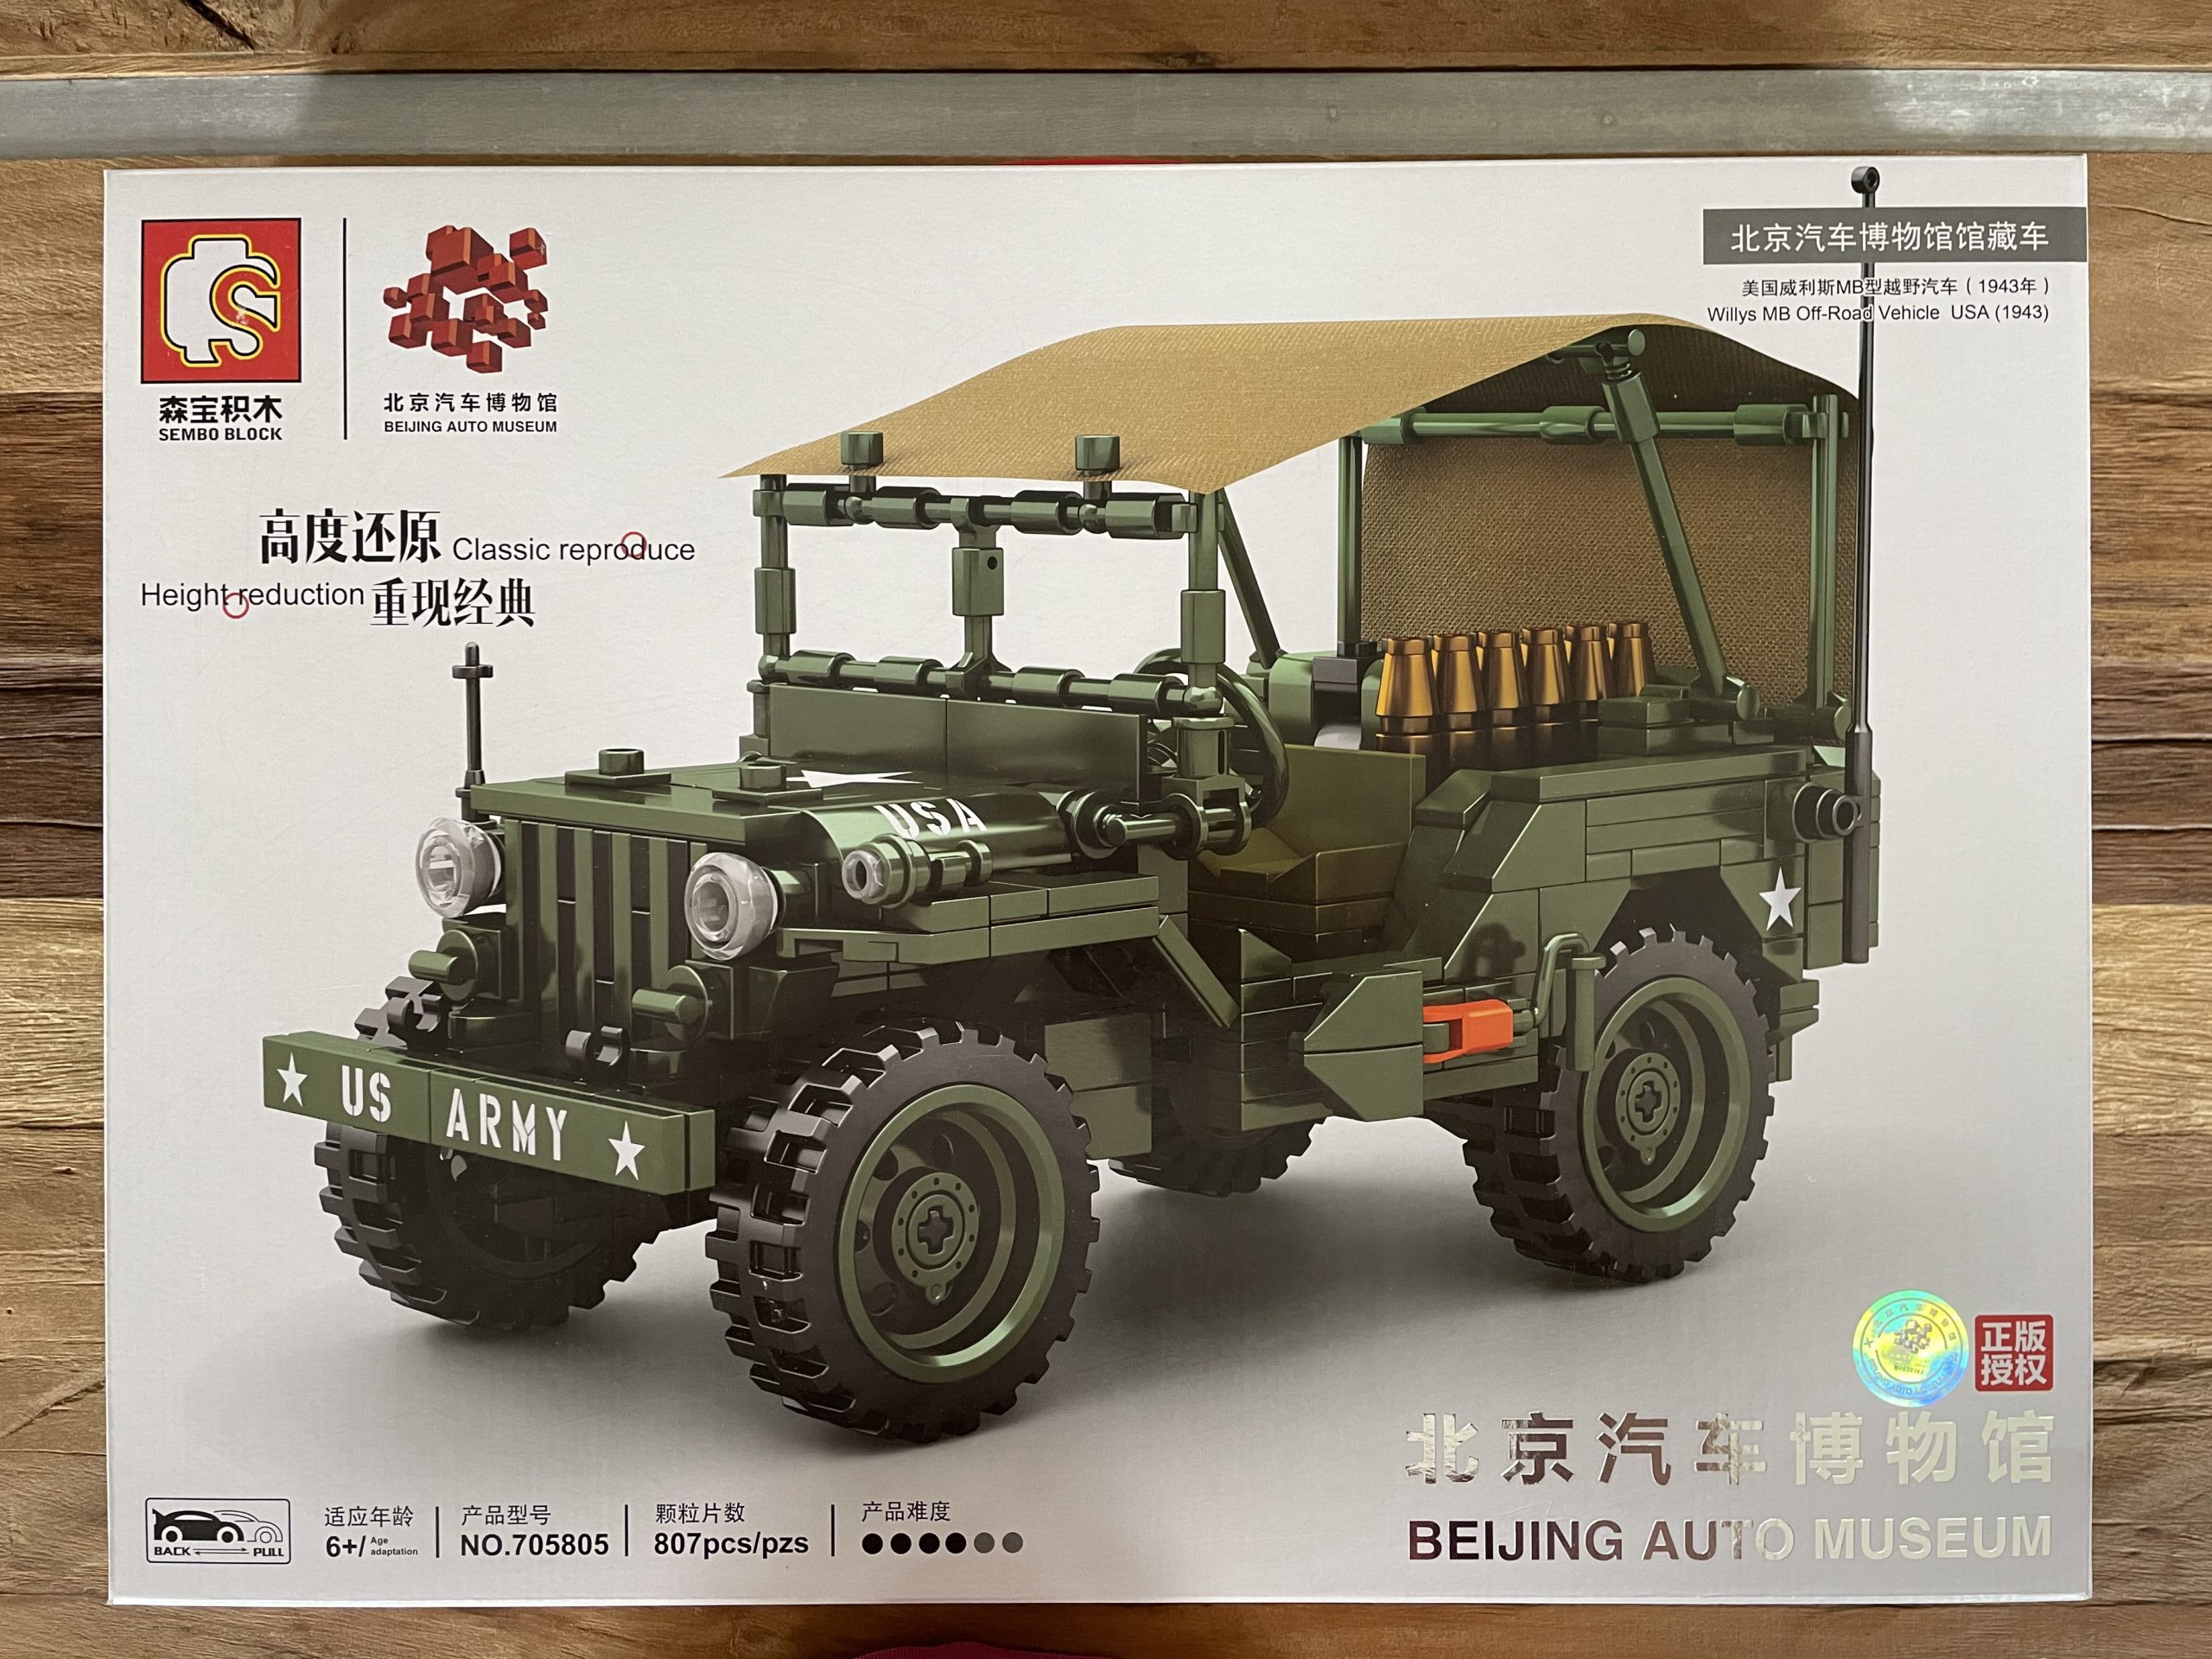 Sembo 705805 Willys MB Off-Road Vehicle USA 1943